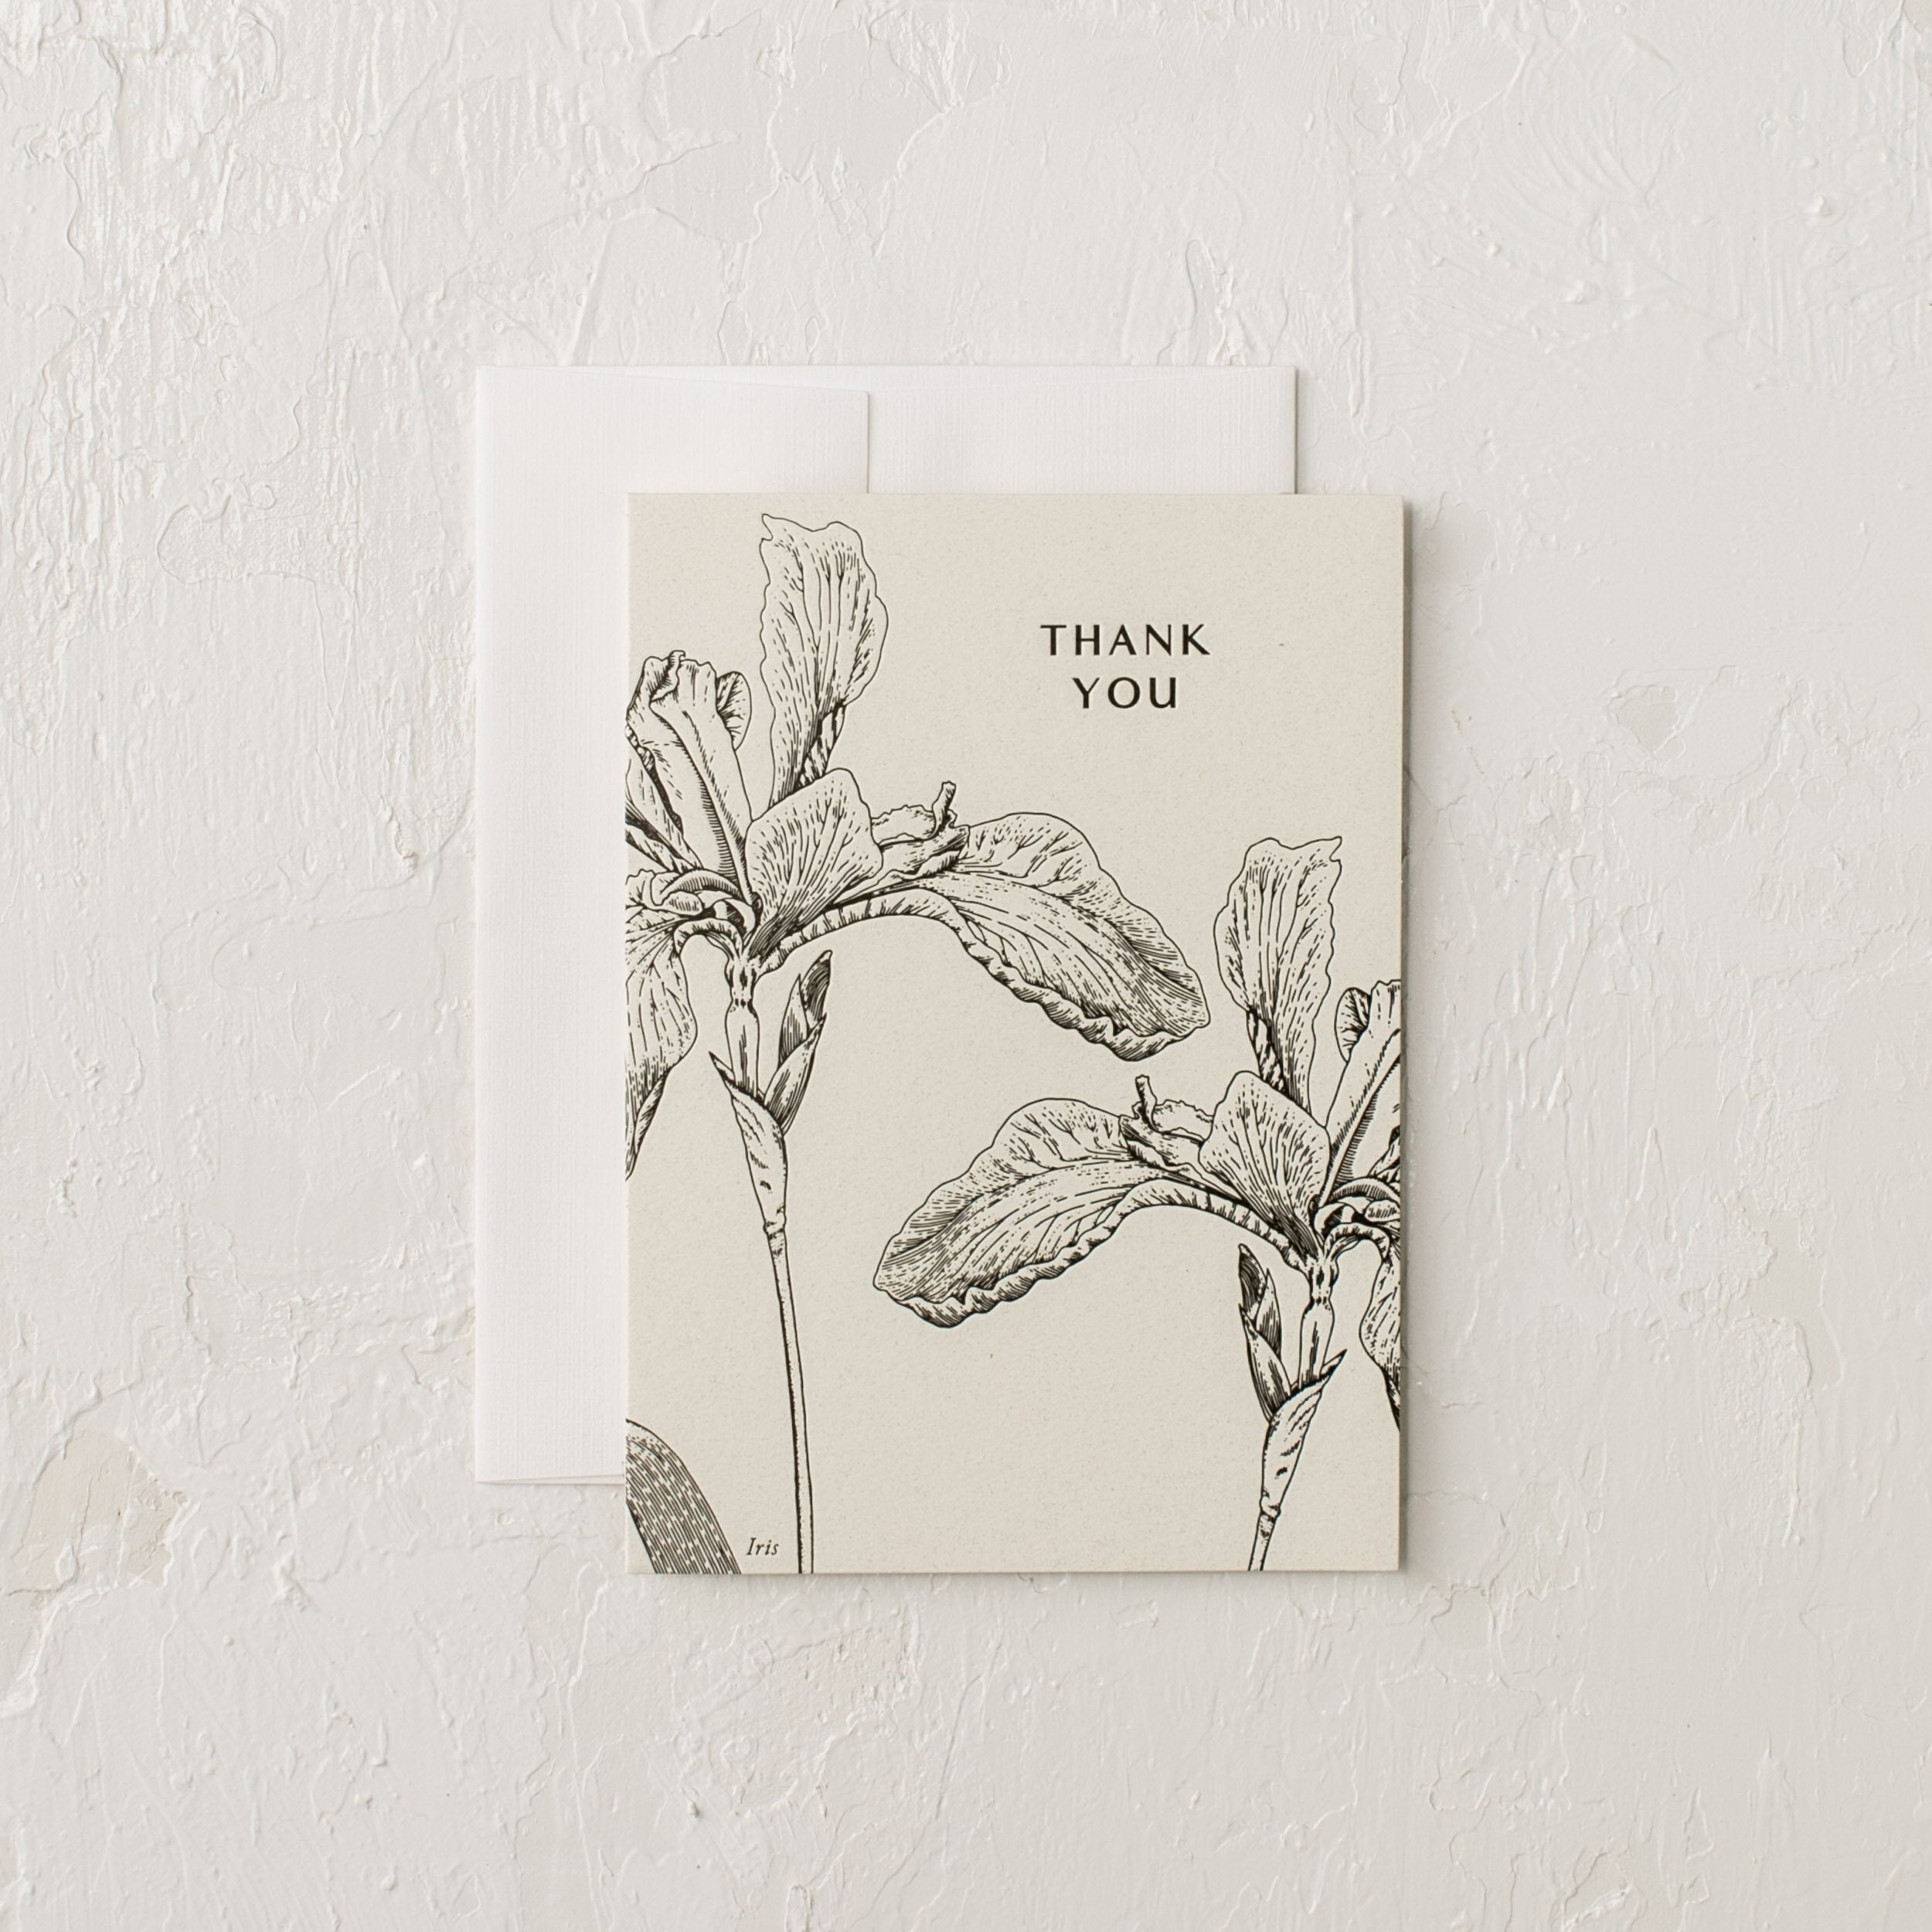 Letter pressed greeting card with a botanical illustrated Iris, "Thank You" -  Designed and sold by Verdant, Kansas City.